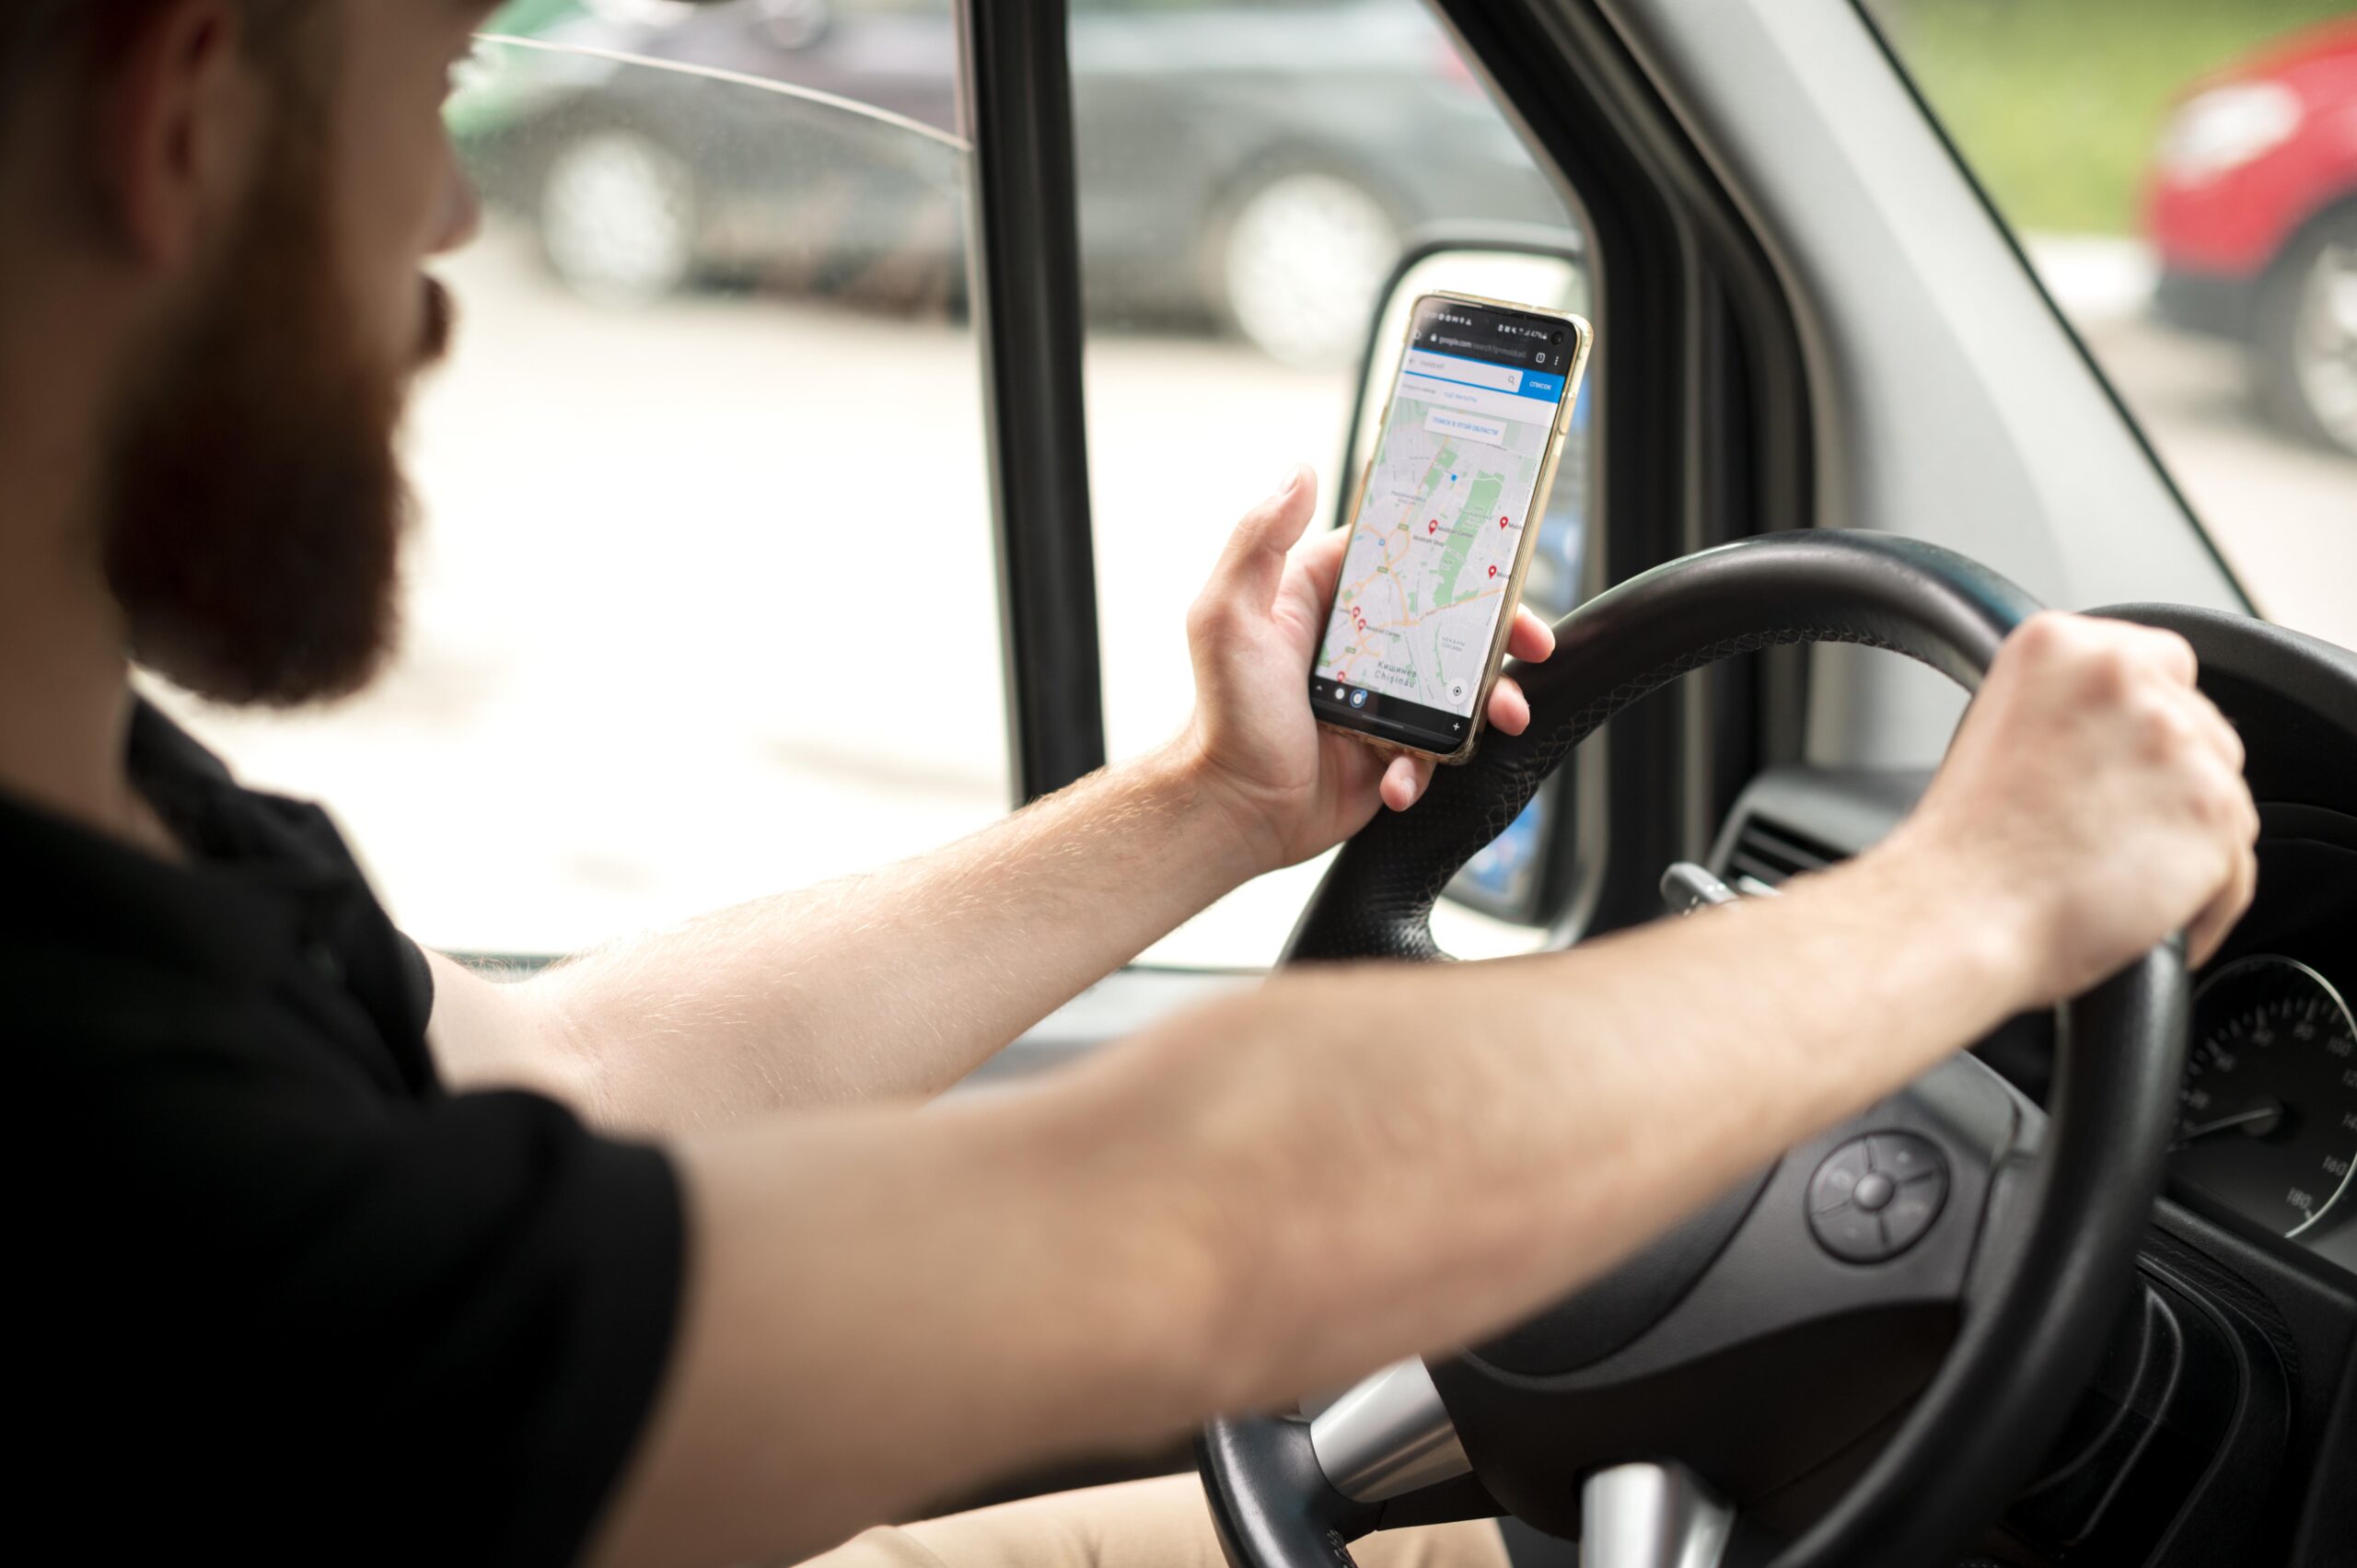 Best Ways to Keep Track of Mileage With Your Smartphone